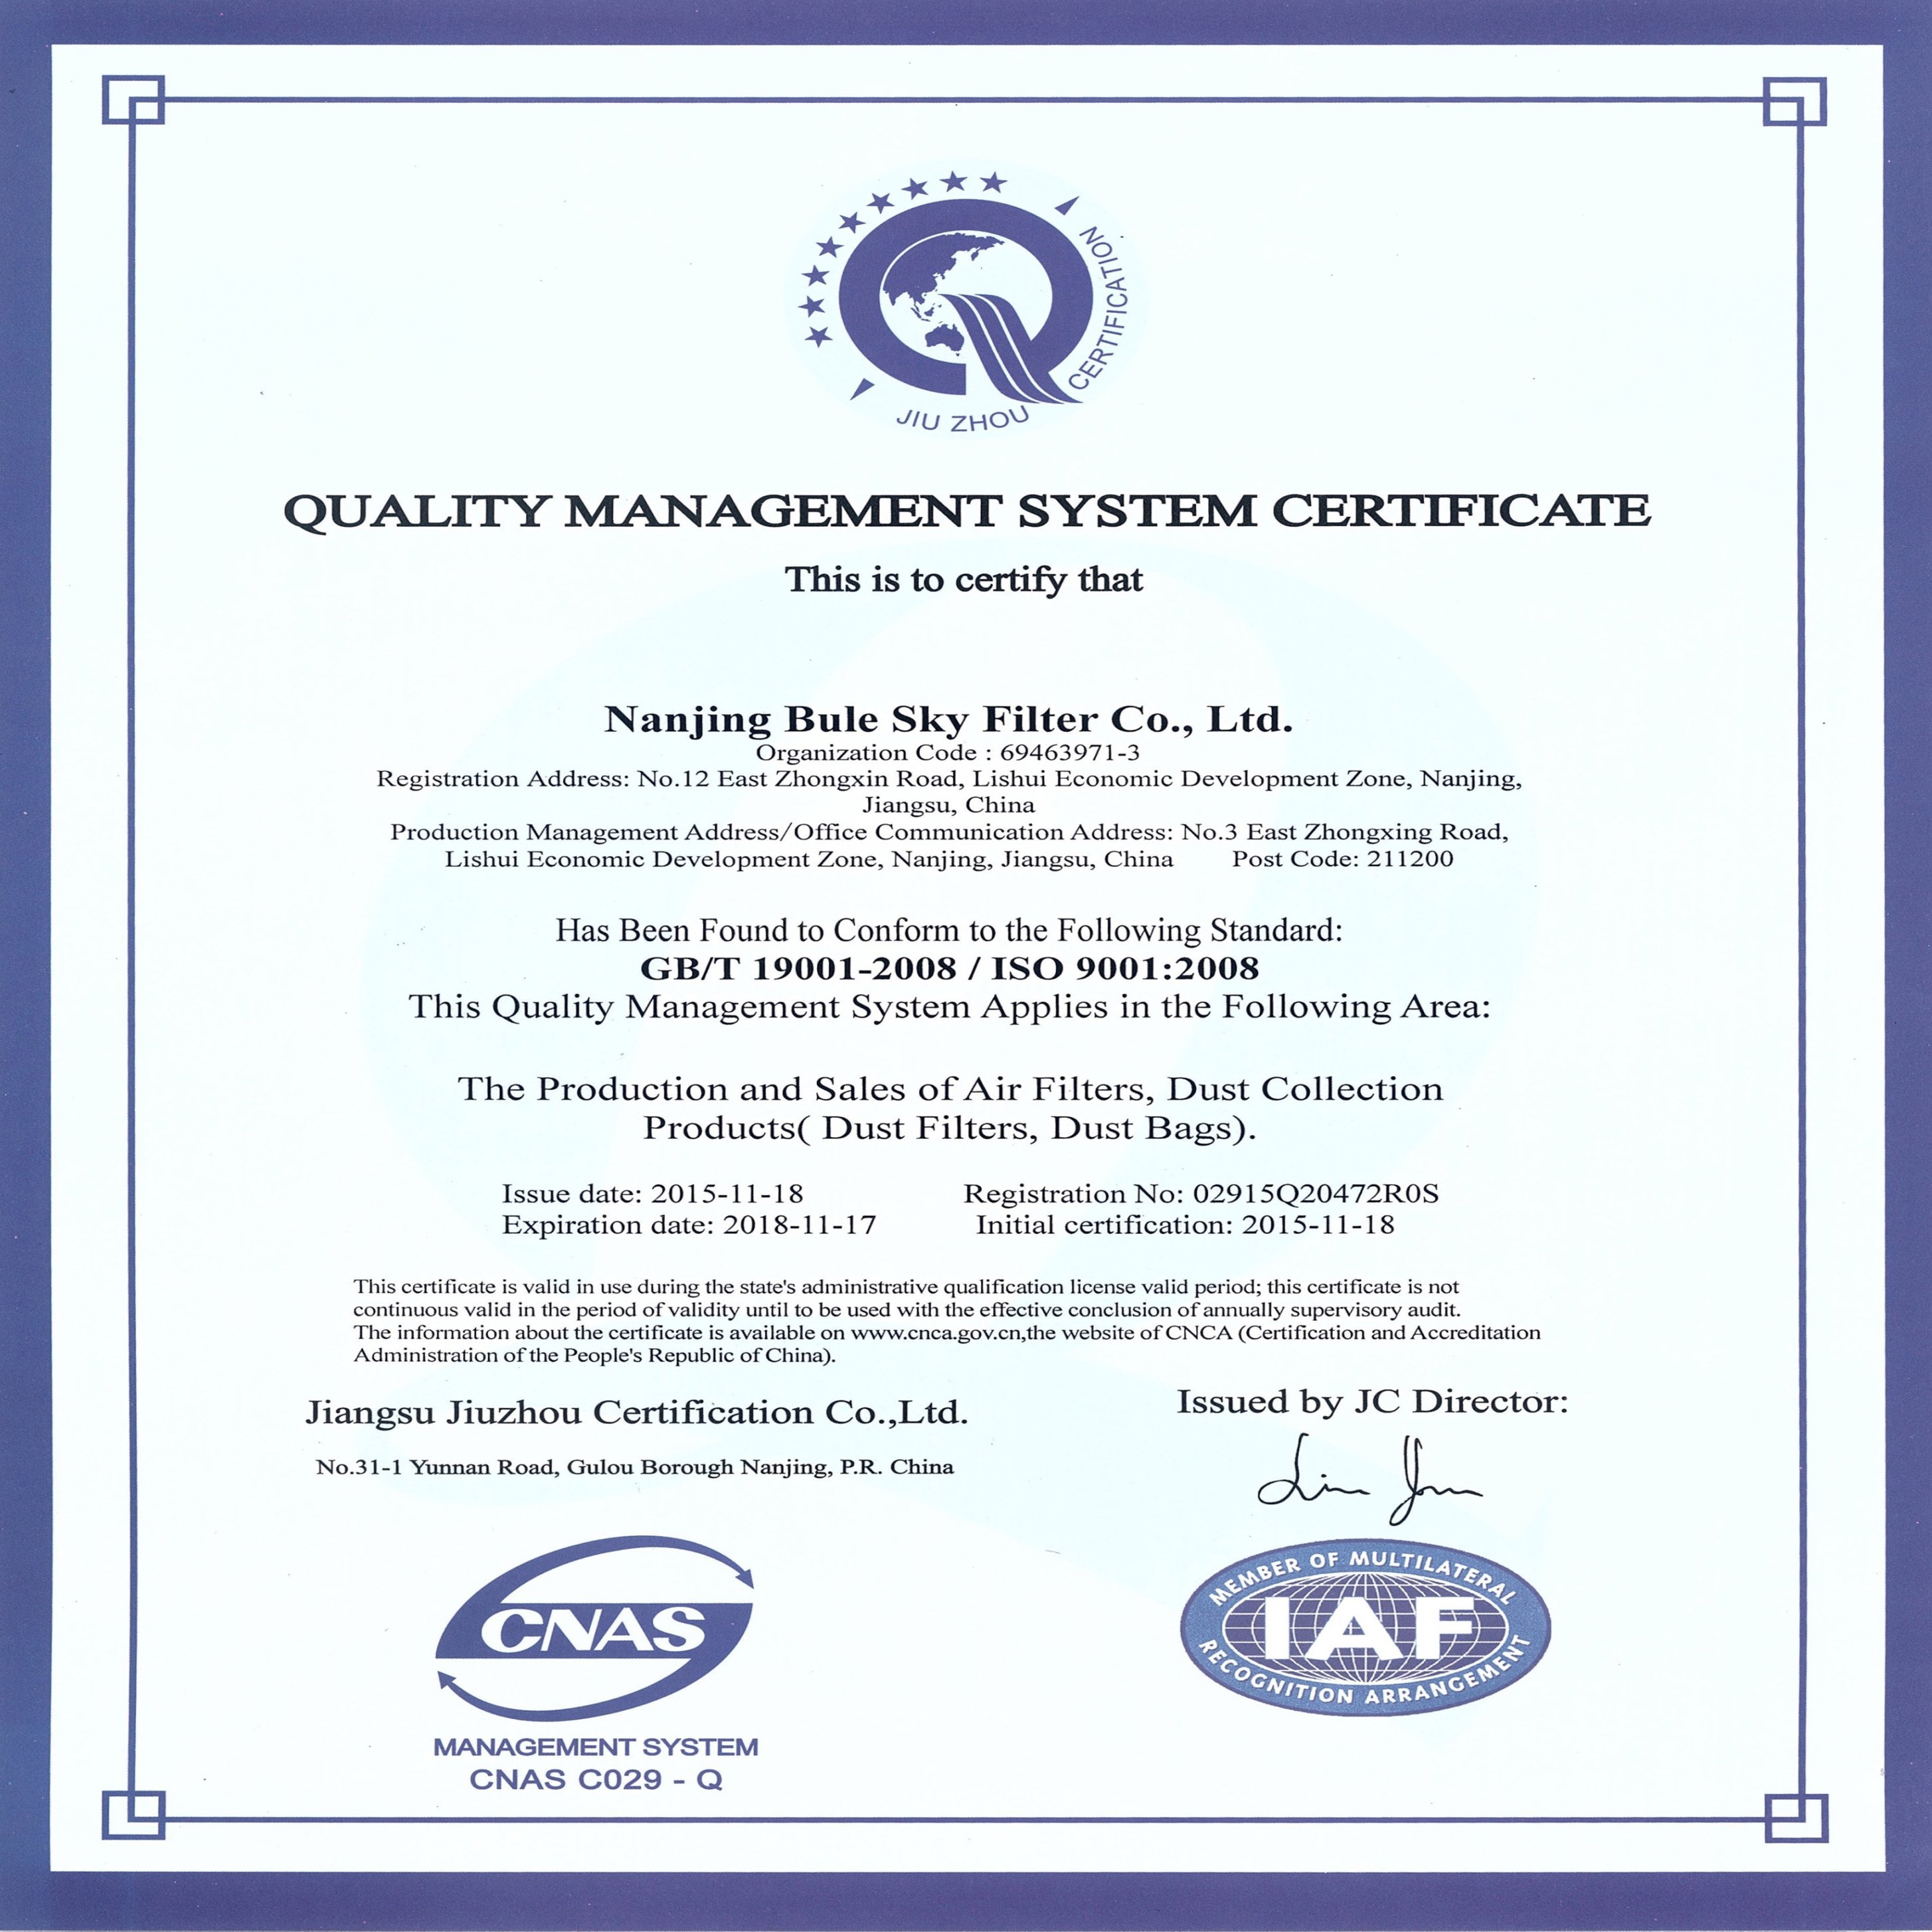 Nanjing Blue Sky Filter Co.,Ltd. just renews ISO9001 and ISO14001 successfully